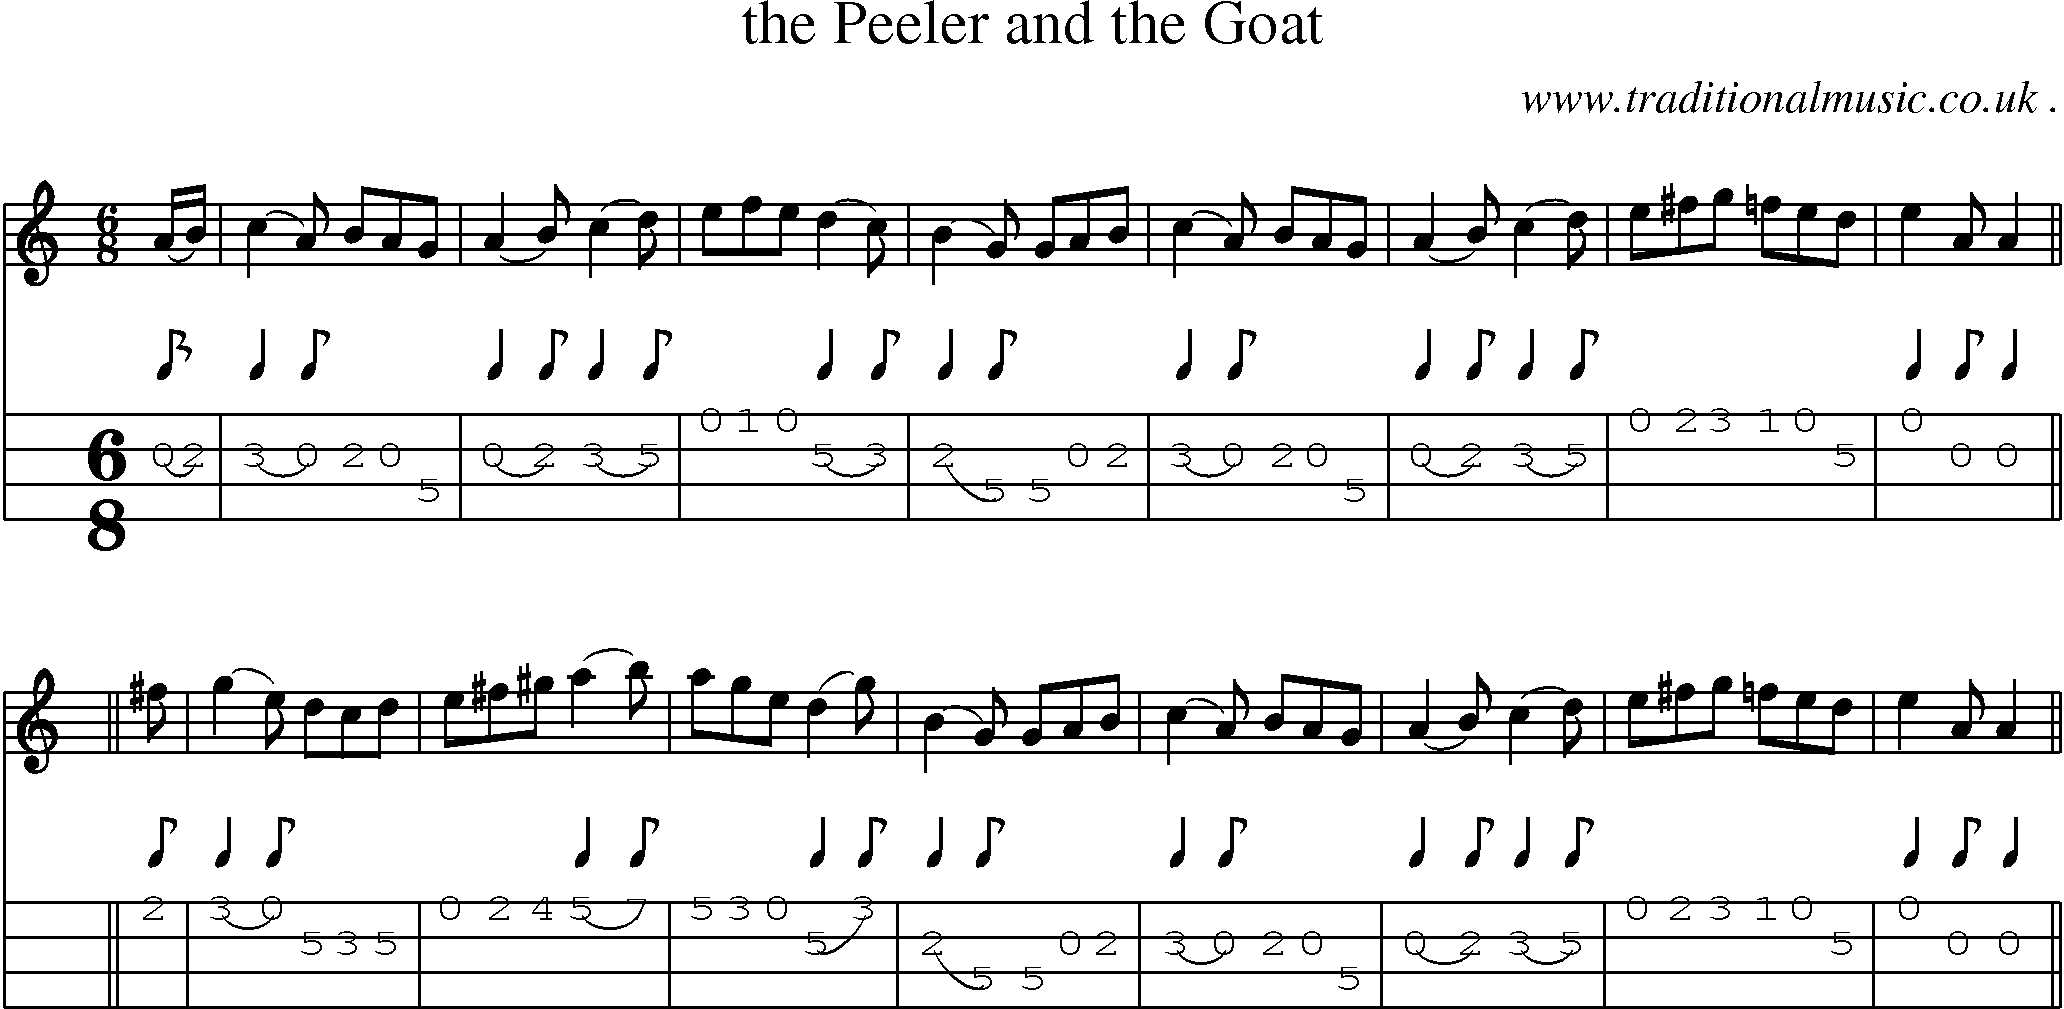 Sheet-music  score, Chords and Mandolin Tabs for The Peeler And The Goat